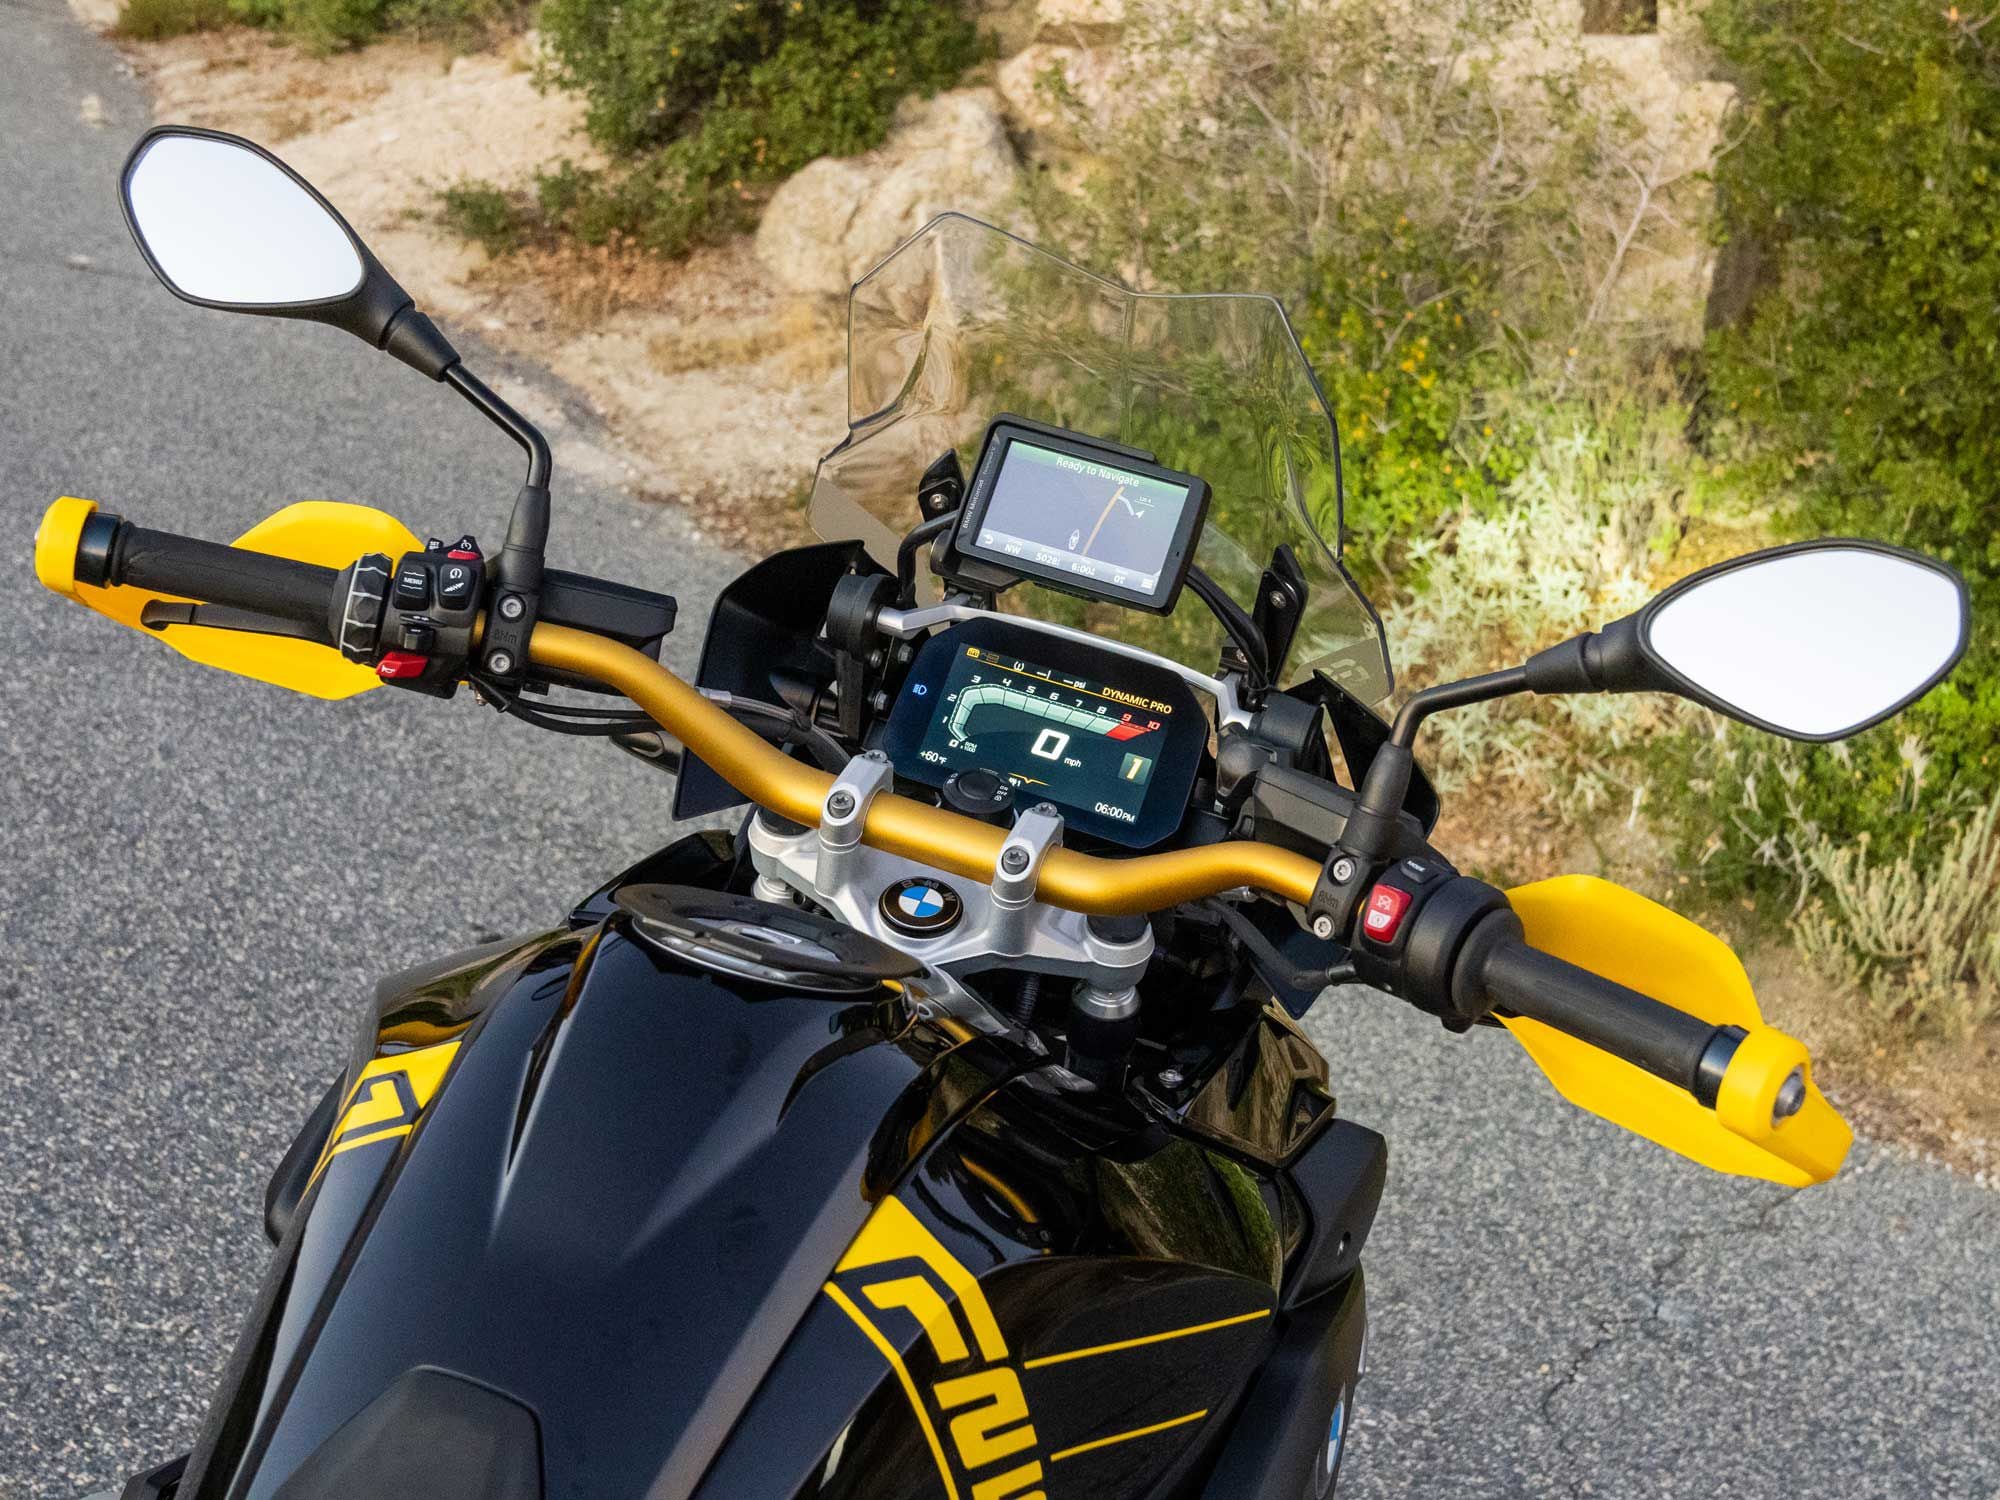 We appreciate the R 1250 GS’s slim cockpit and its pleasing handlebar bend that is neither too road, or off-road biased.